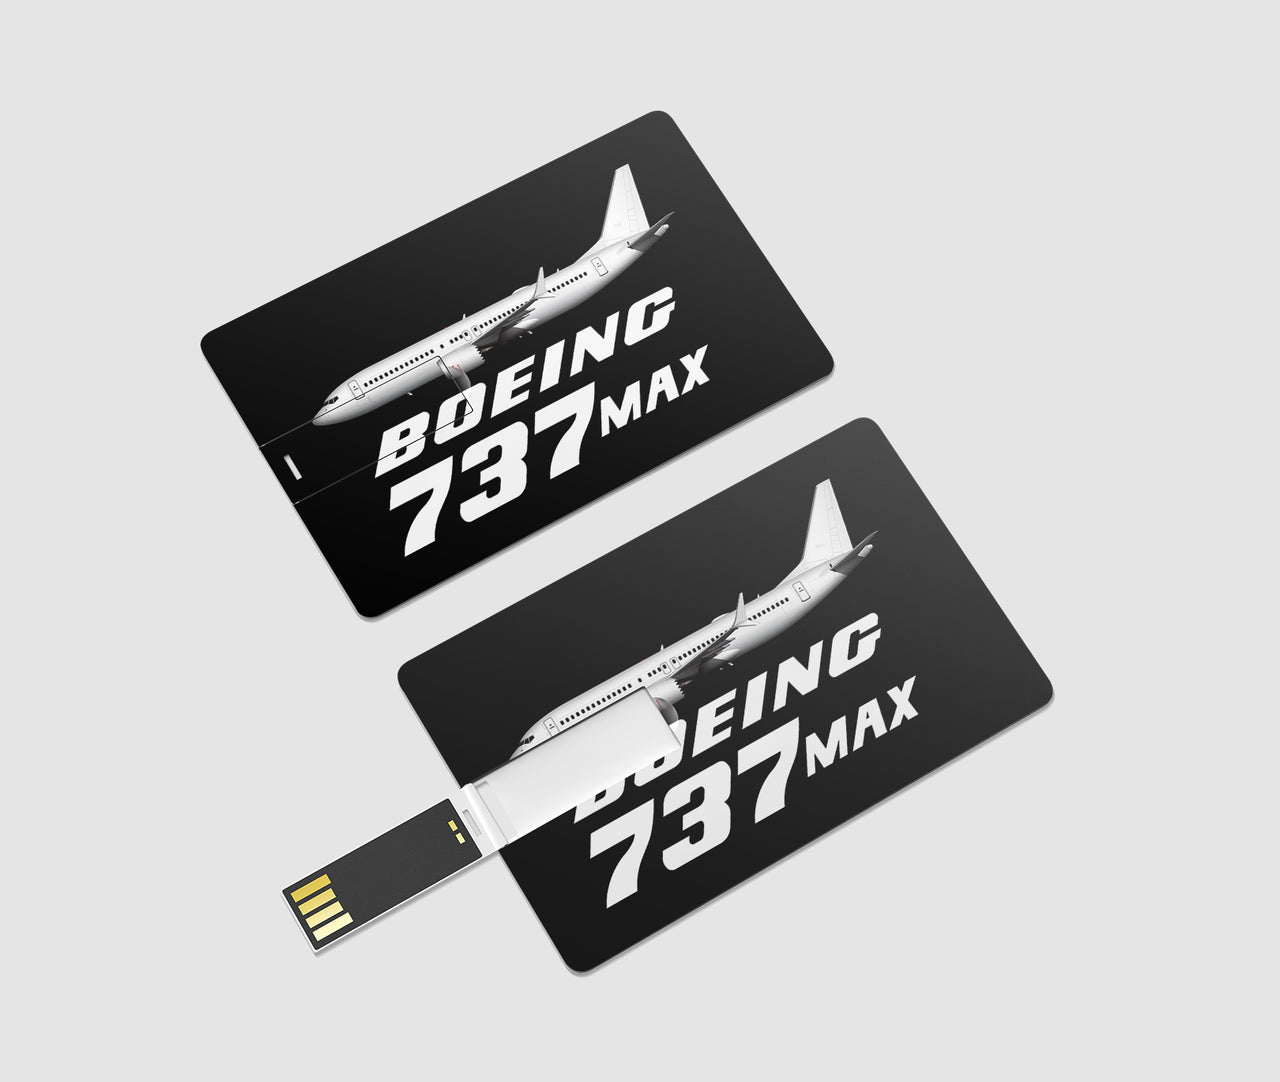 The Boeing 737Max Designed USB Cards